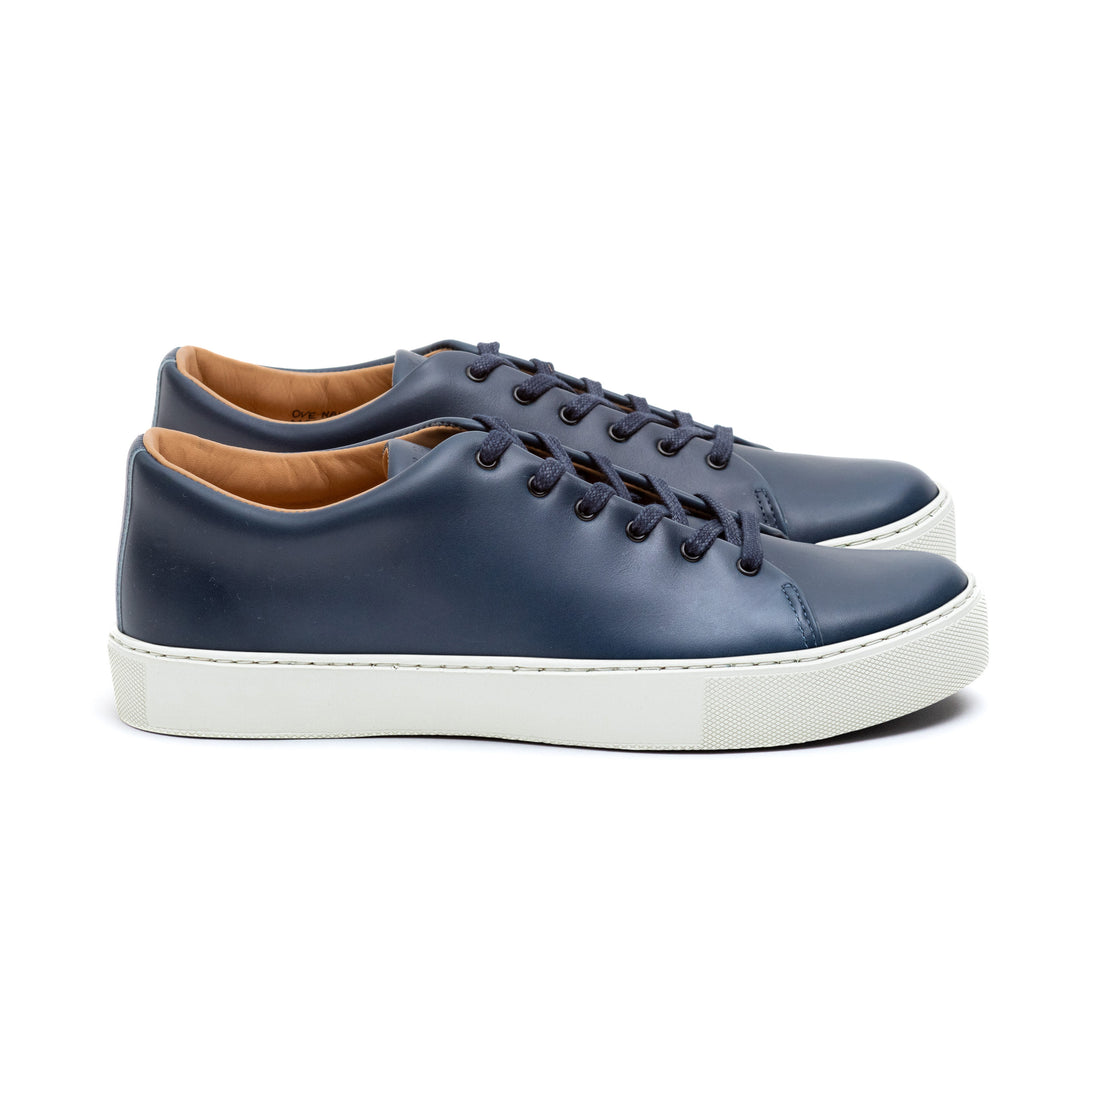 Crown Northampton Overstone Derby - Navy Calf Leather Sneakers